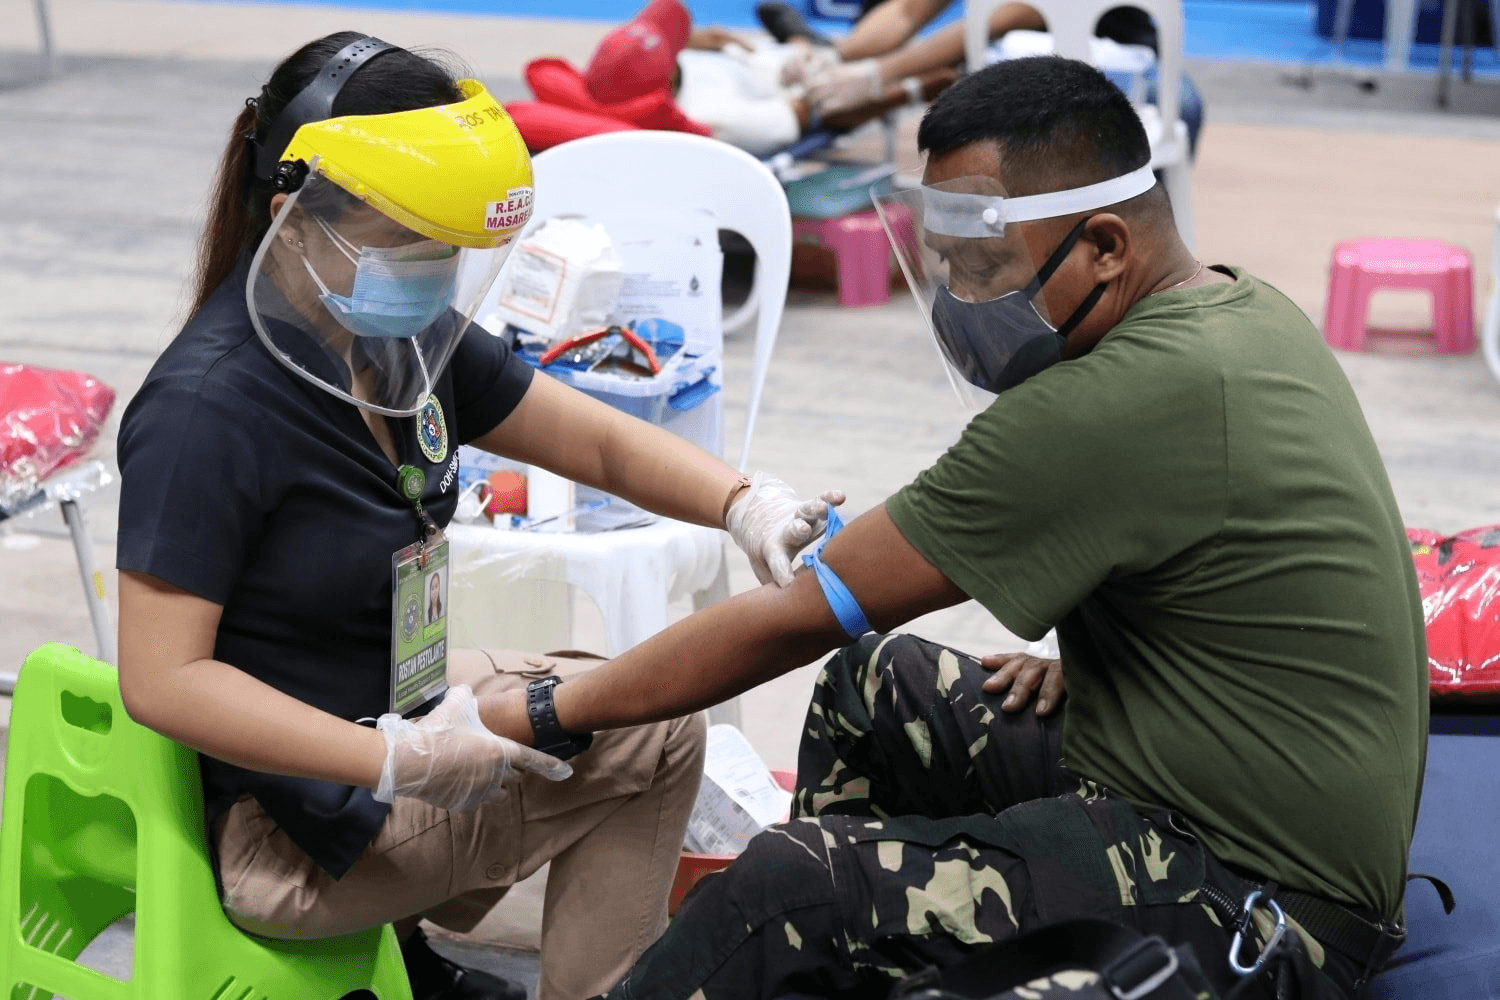 Lapu-Lapu City residents donate blood for COVID-19 patients